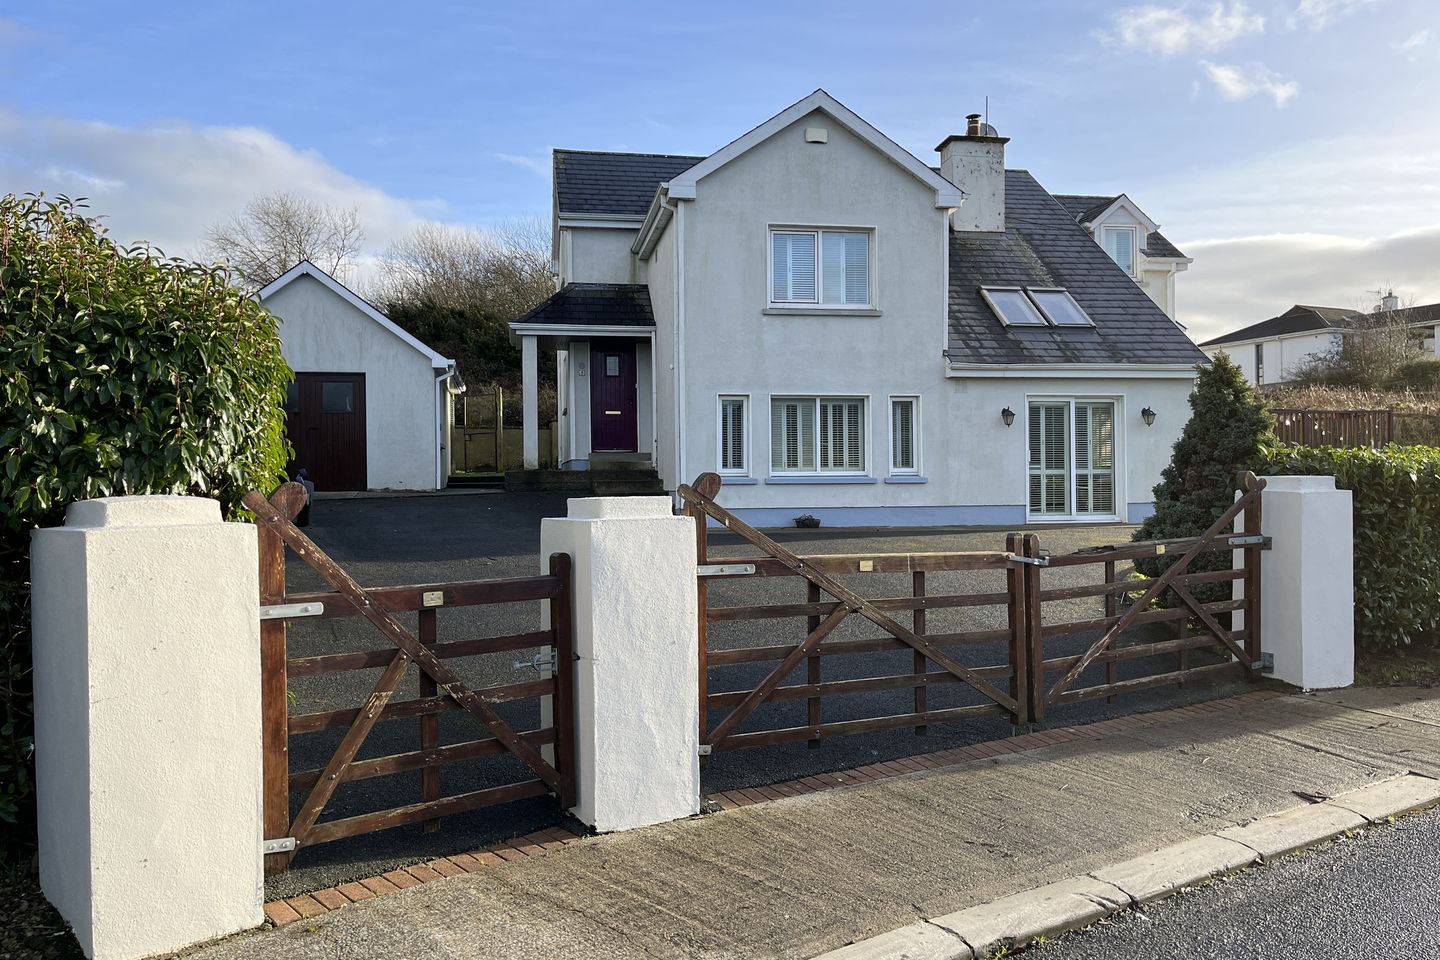 8 Lakeview, Cullenagh, Ballina, Co. Tipperary